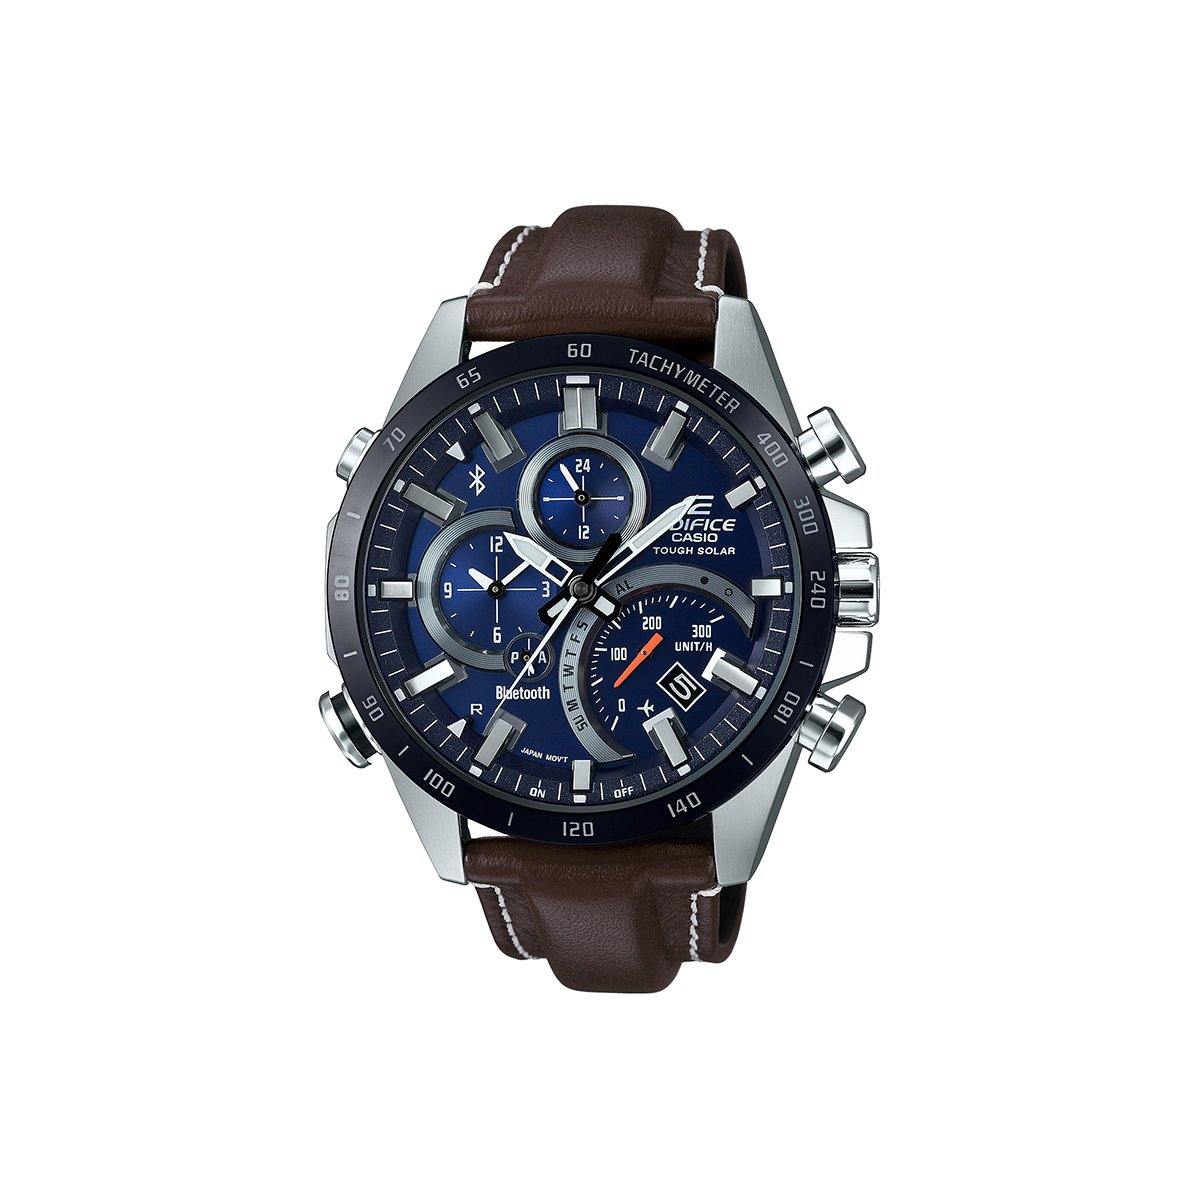 følsomhed utilgivelig piedestal Casio Edifice Smartphone Link Watch w/ Leather Strap and Blue Dial | Smart  Neighbor